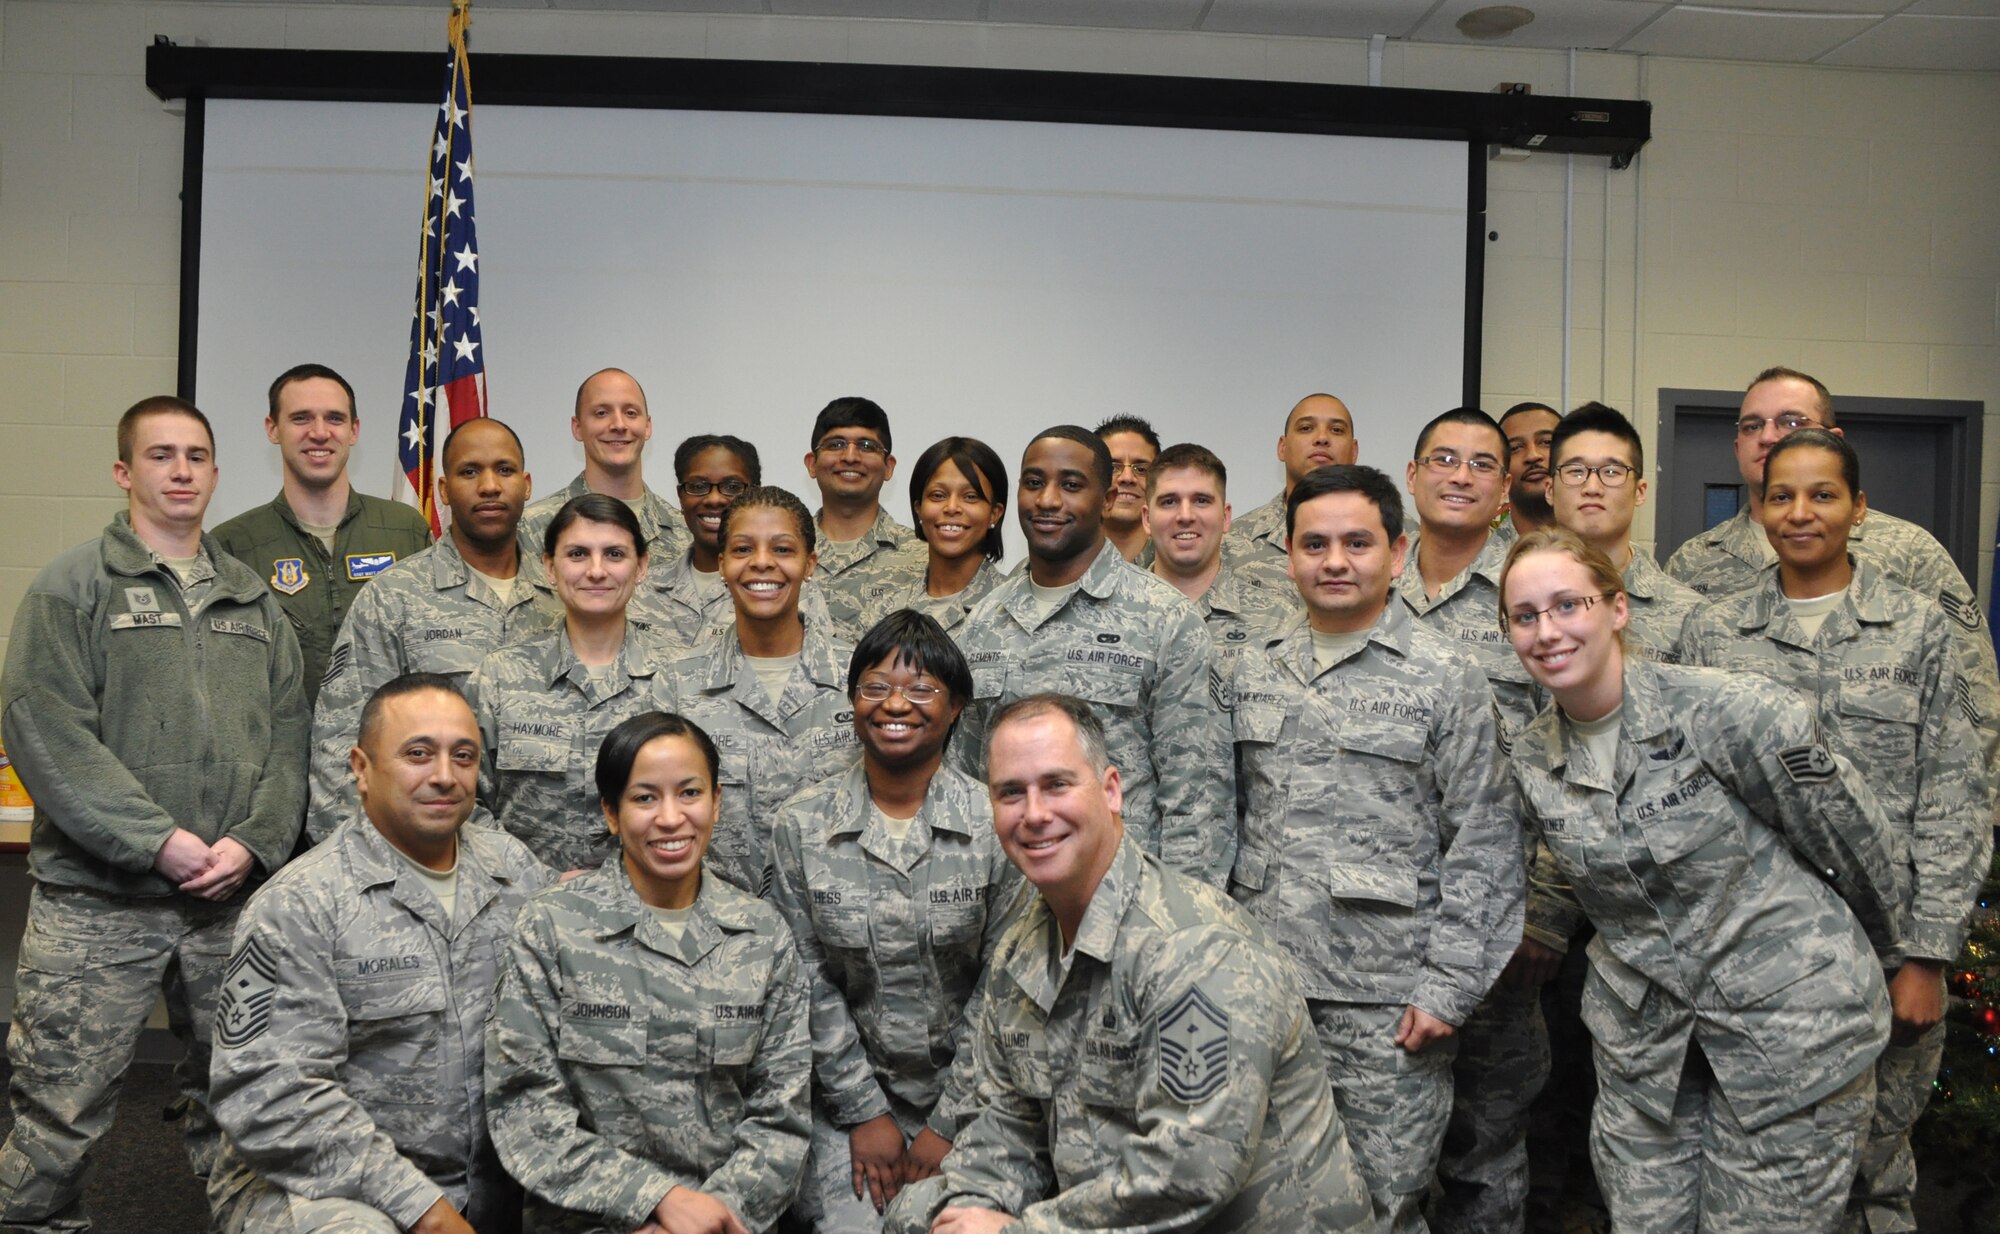 Airmen from the 459th Air Refueling Wing at Joint Base Andrews, Md., pose for a group picture after graduating the Non-Commissioned Officer Leader Development Course, December 21, 2012. The two-week course focused on leadership techniques and NCO fundementals. (U.S. Air Force photo/ Senior Airman Katie Spencer)